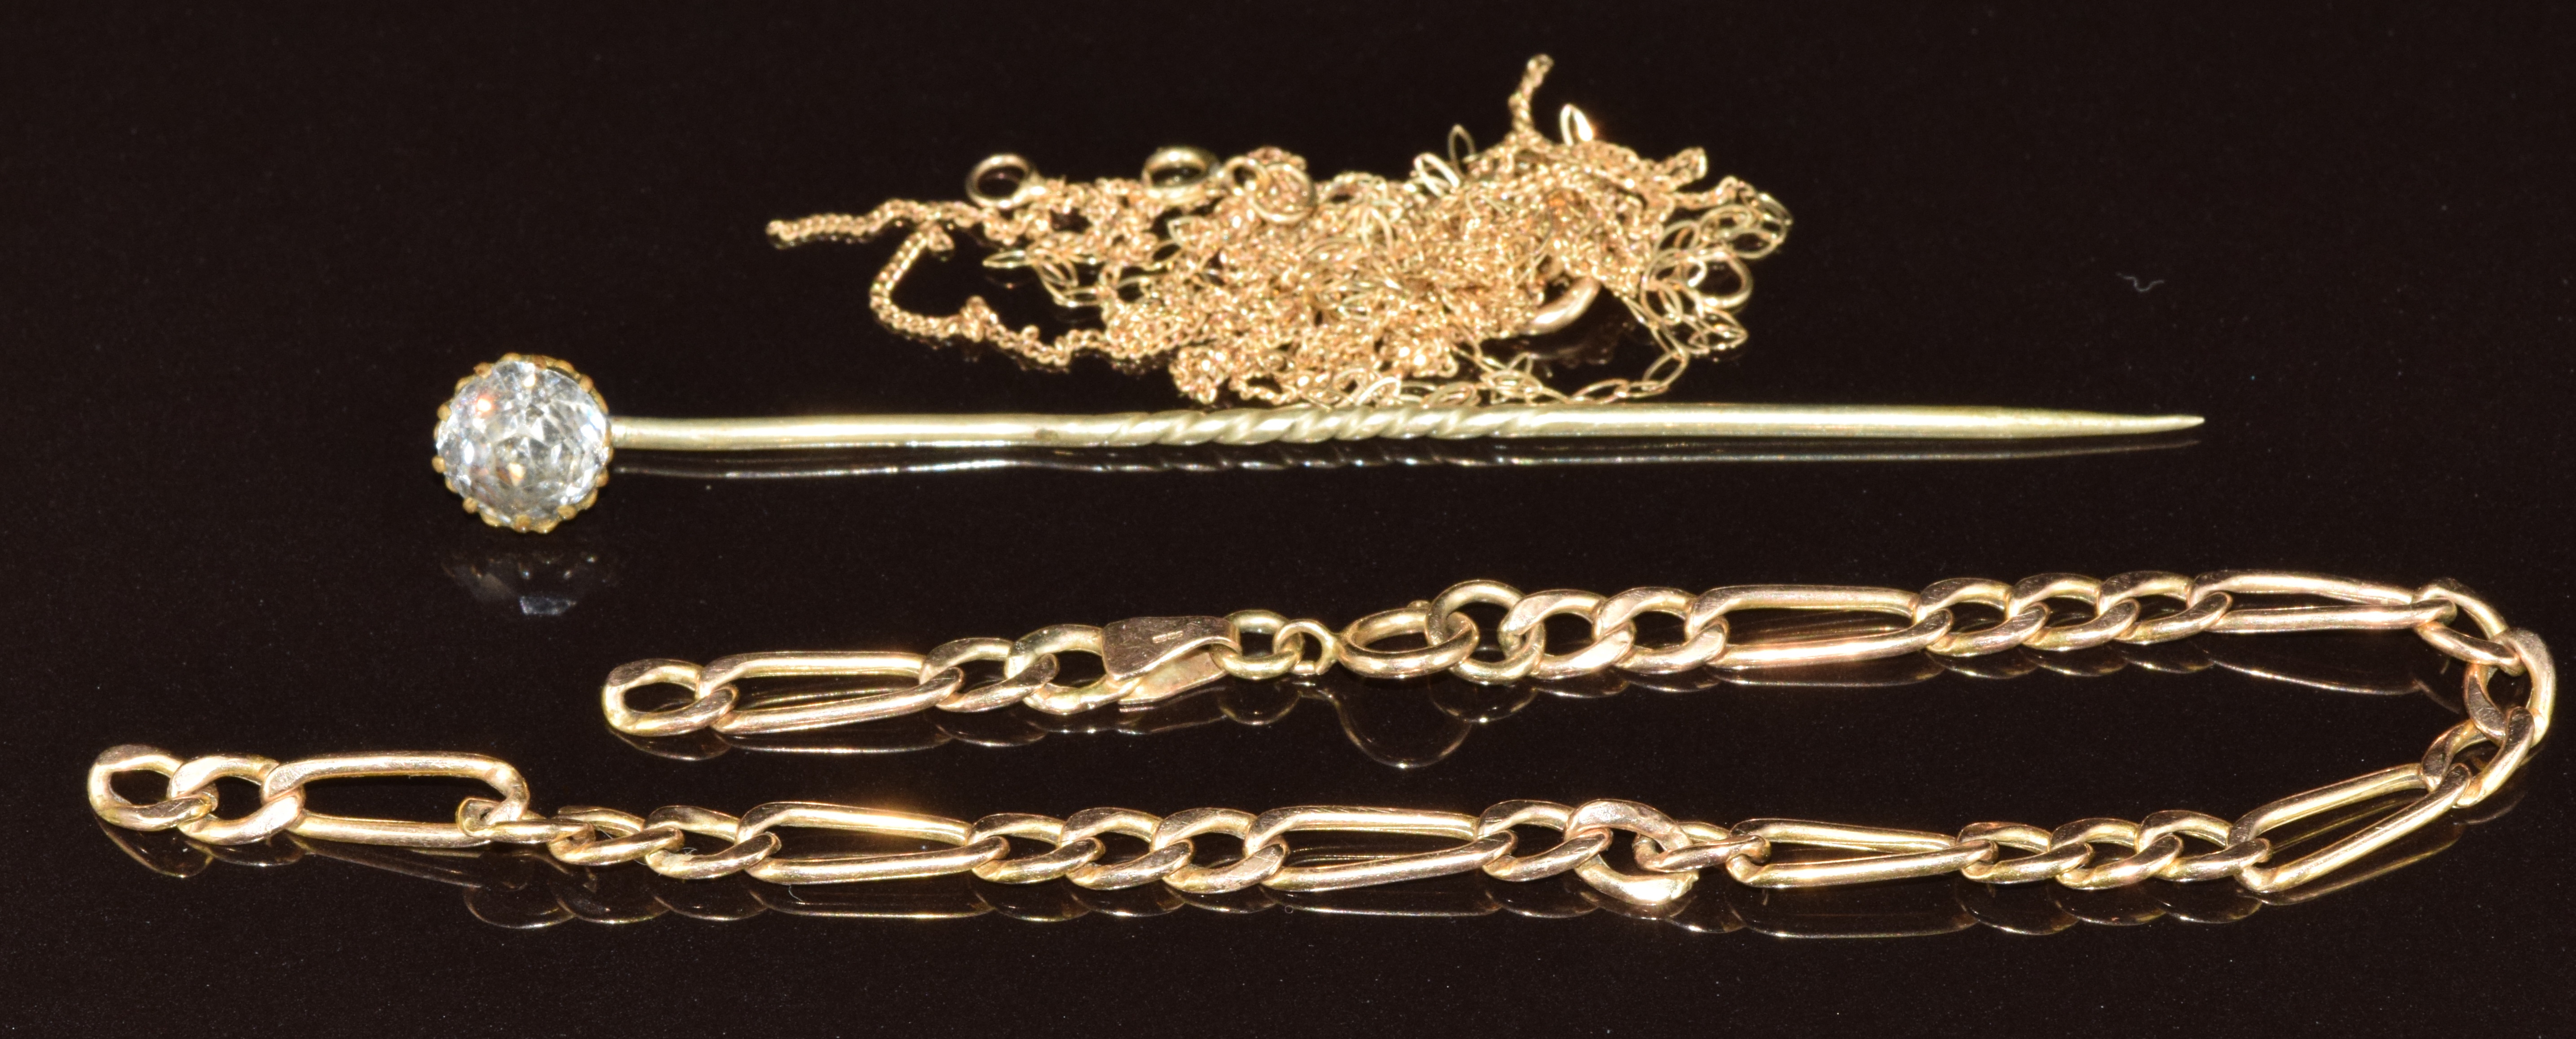 Damaged sections of 9ct gold chain (3.6g) and a paste set stick pin